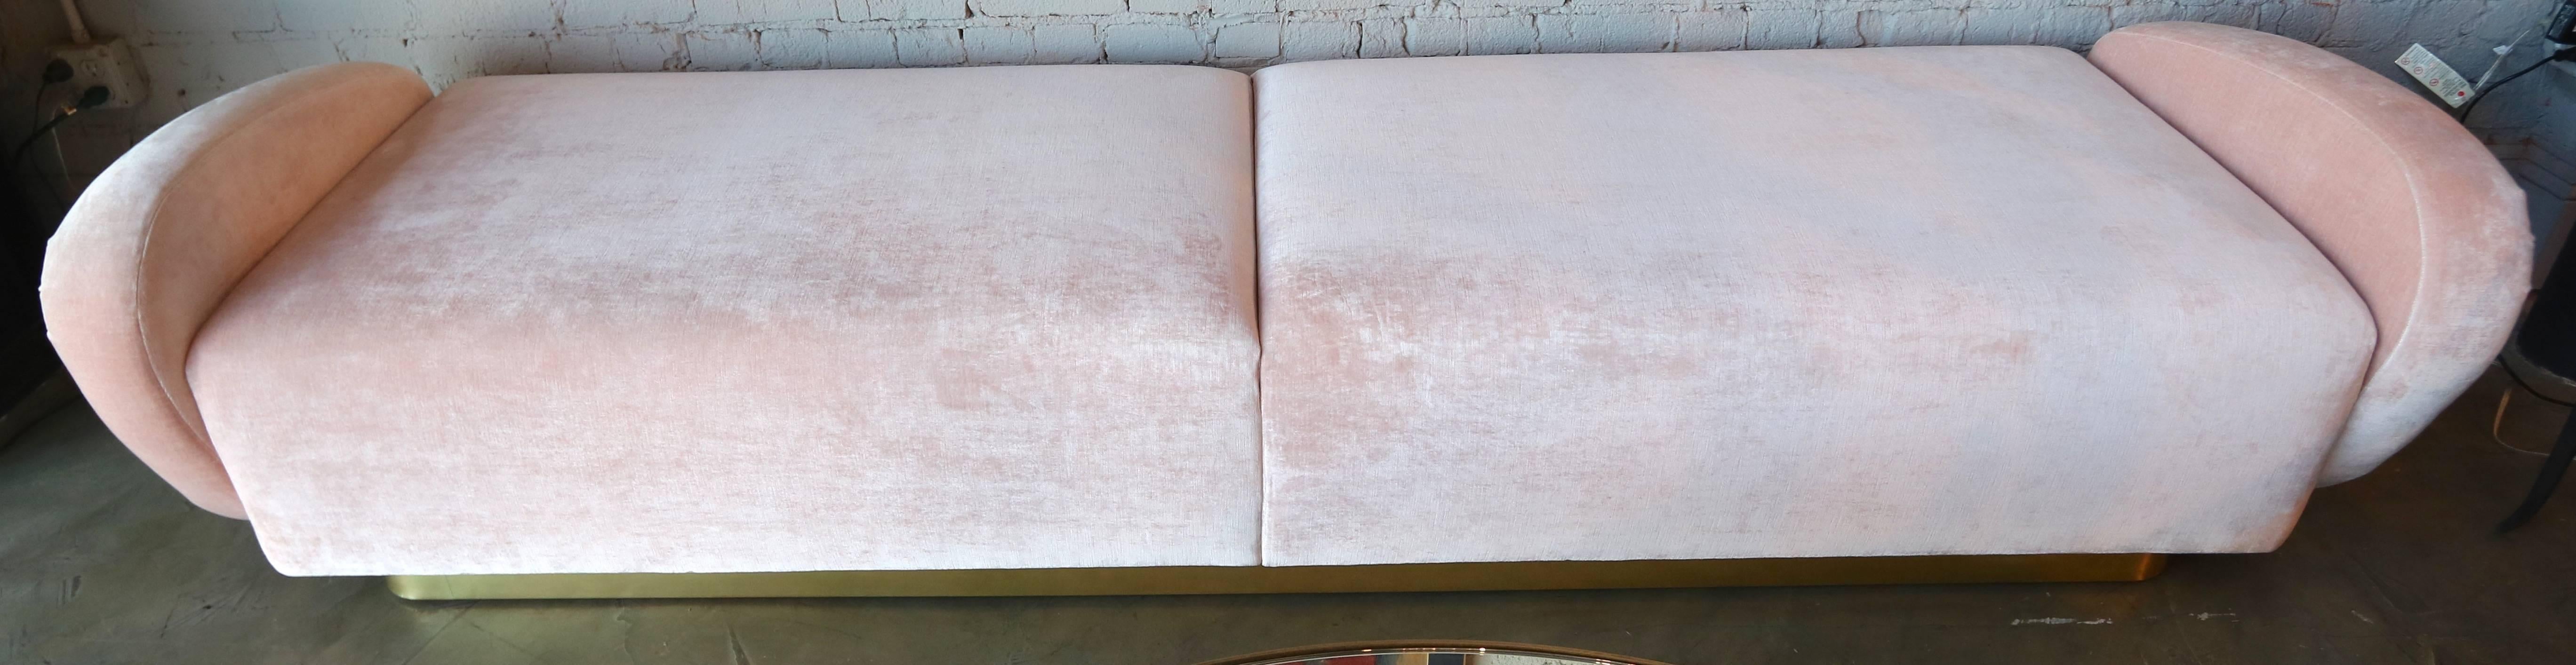 Custom 1960s Italian style sofa or bench with handmade brass base upholstered in light pink velvet. Made in Los Angeles by Adesso Imports. Can be done in different colors, fabrics and finishes.